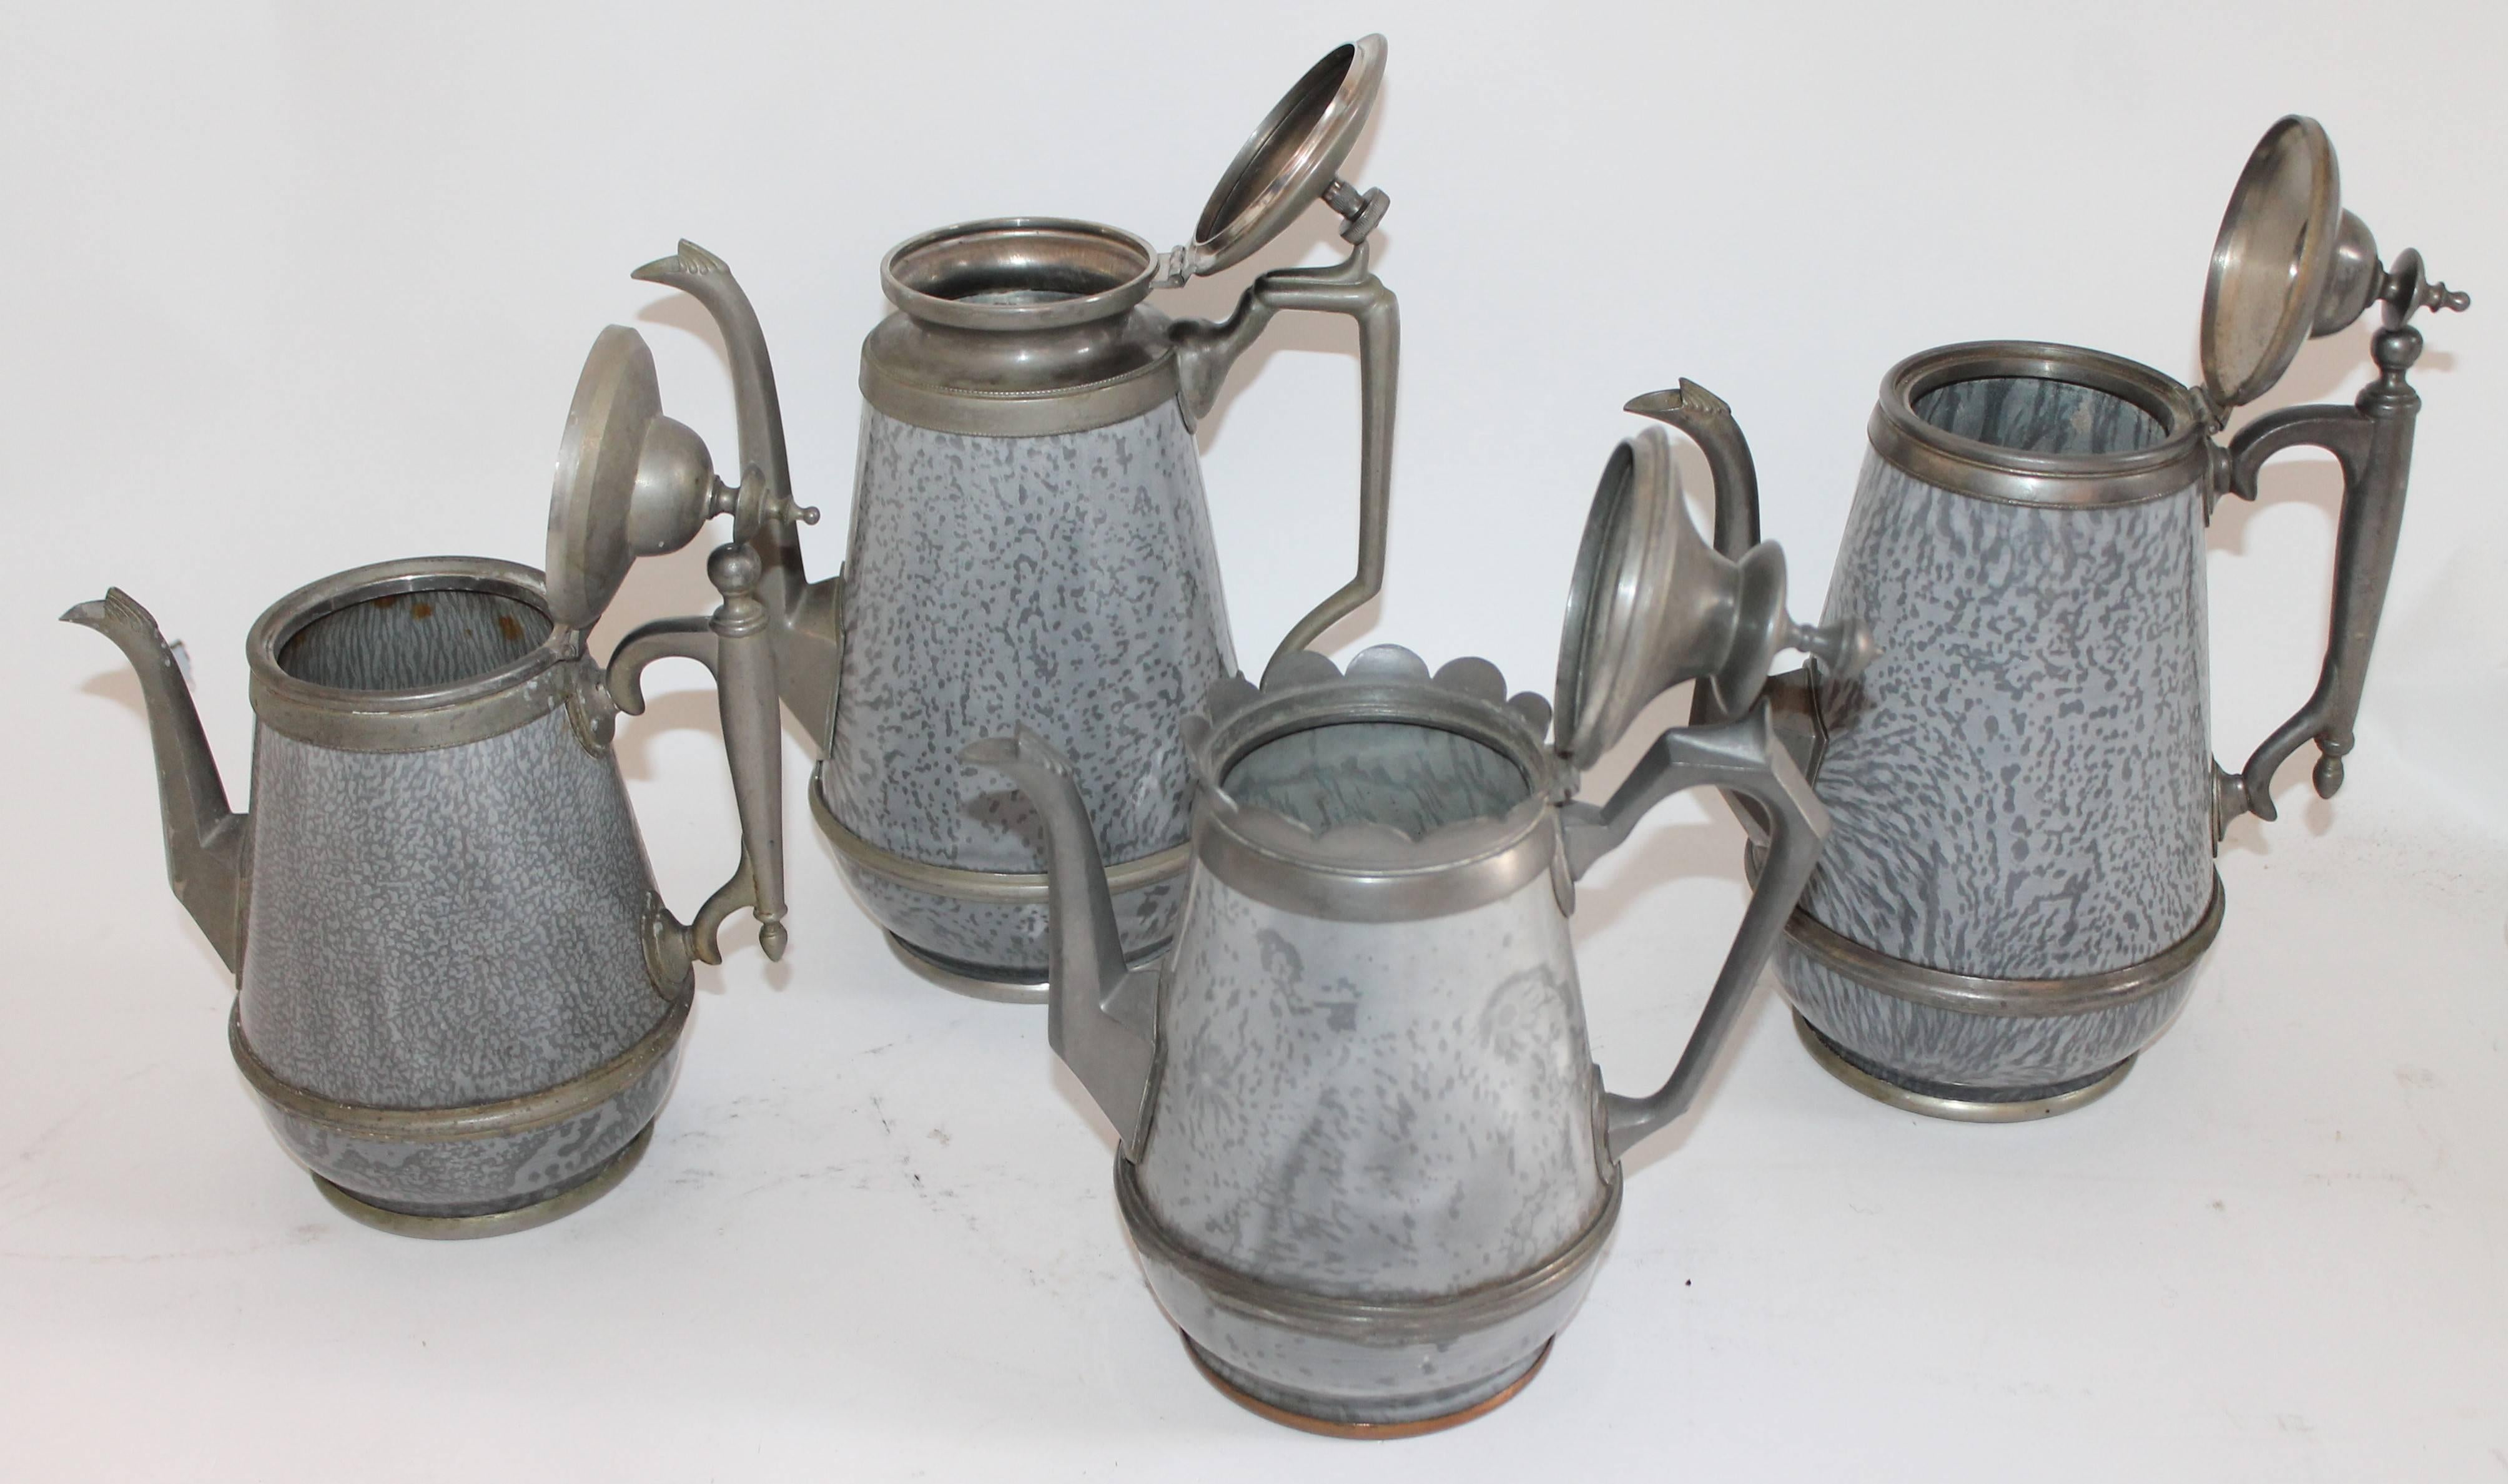 This fine collection of enamel coffee pots are in pristine condition and come from one collection. The mix of pewter and enamel looks great with any collection of antique pewter serving pieces. One is dated 1818. Minor dents in some areas of the